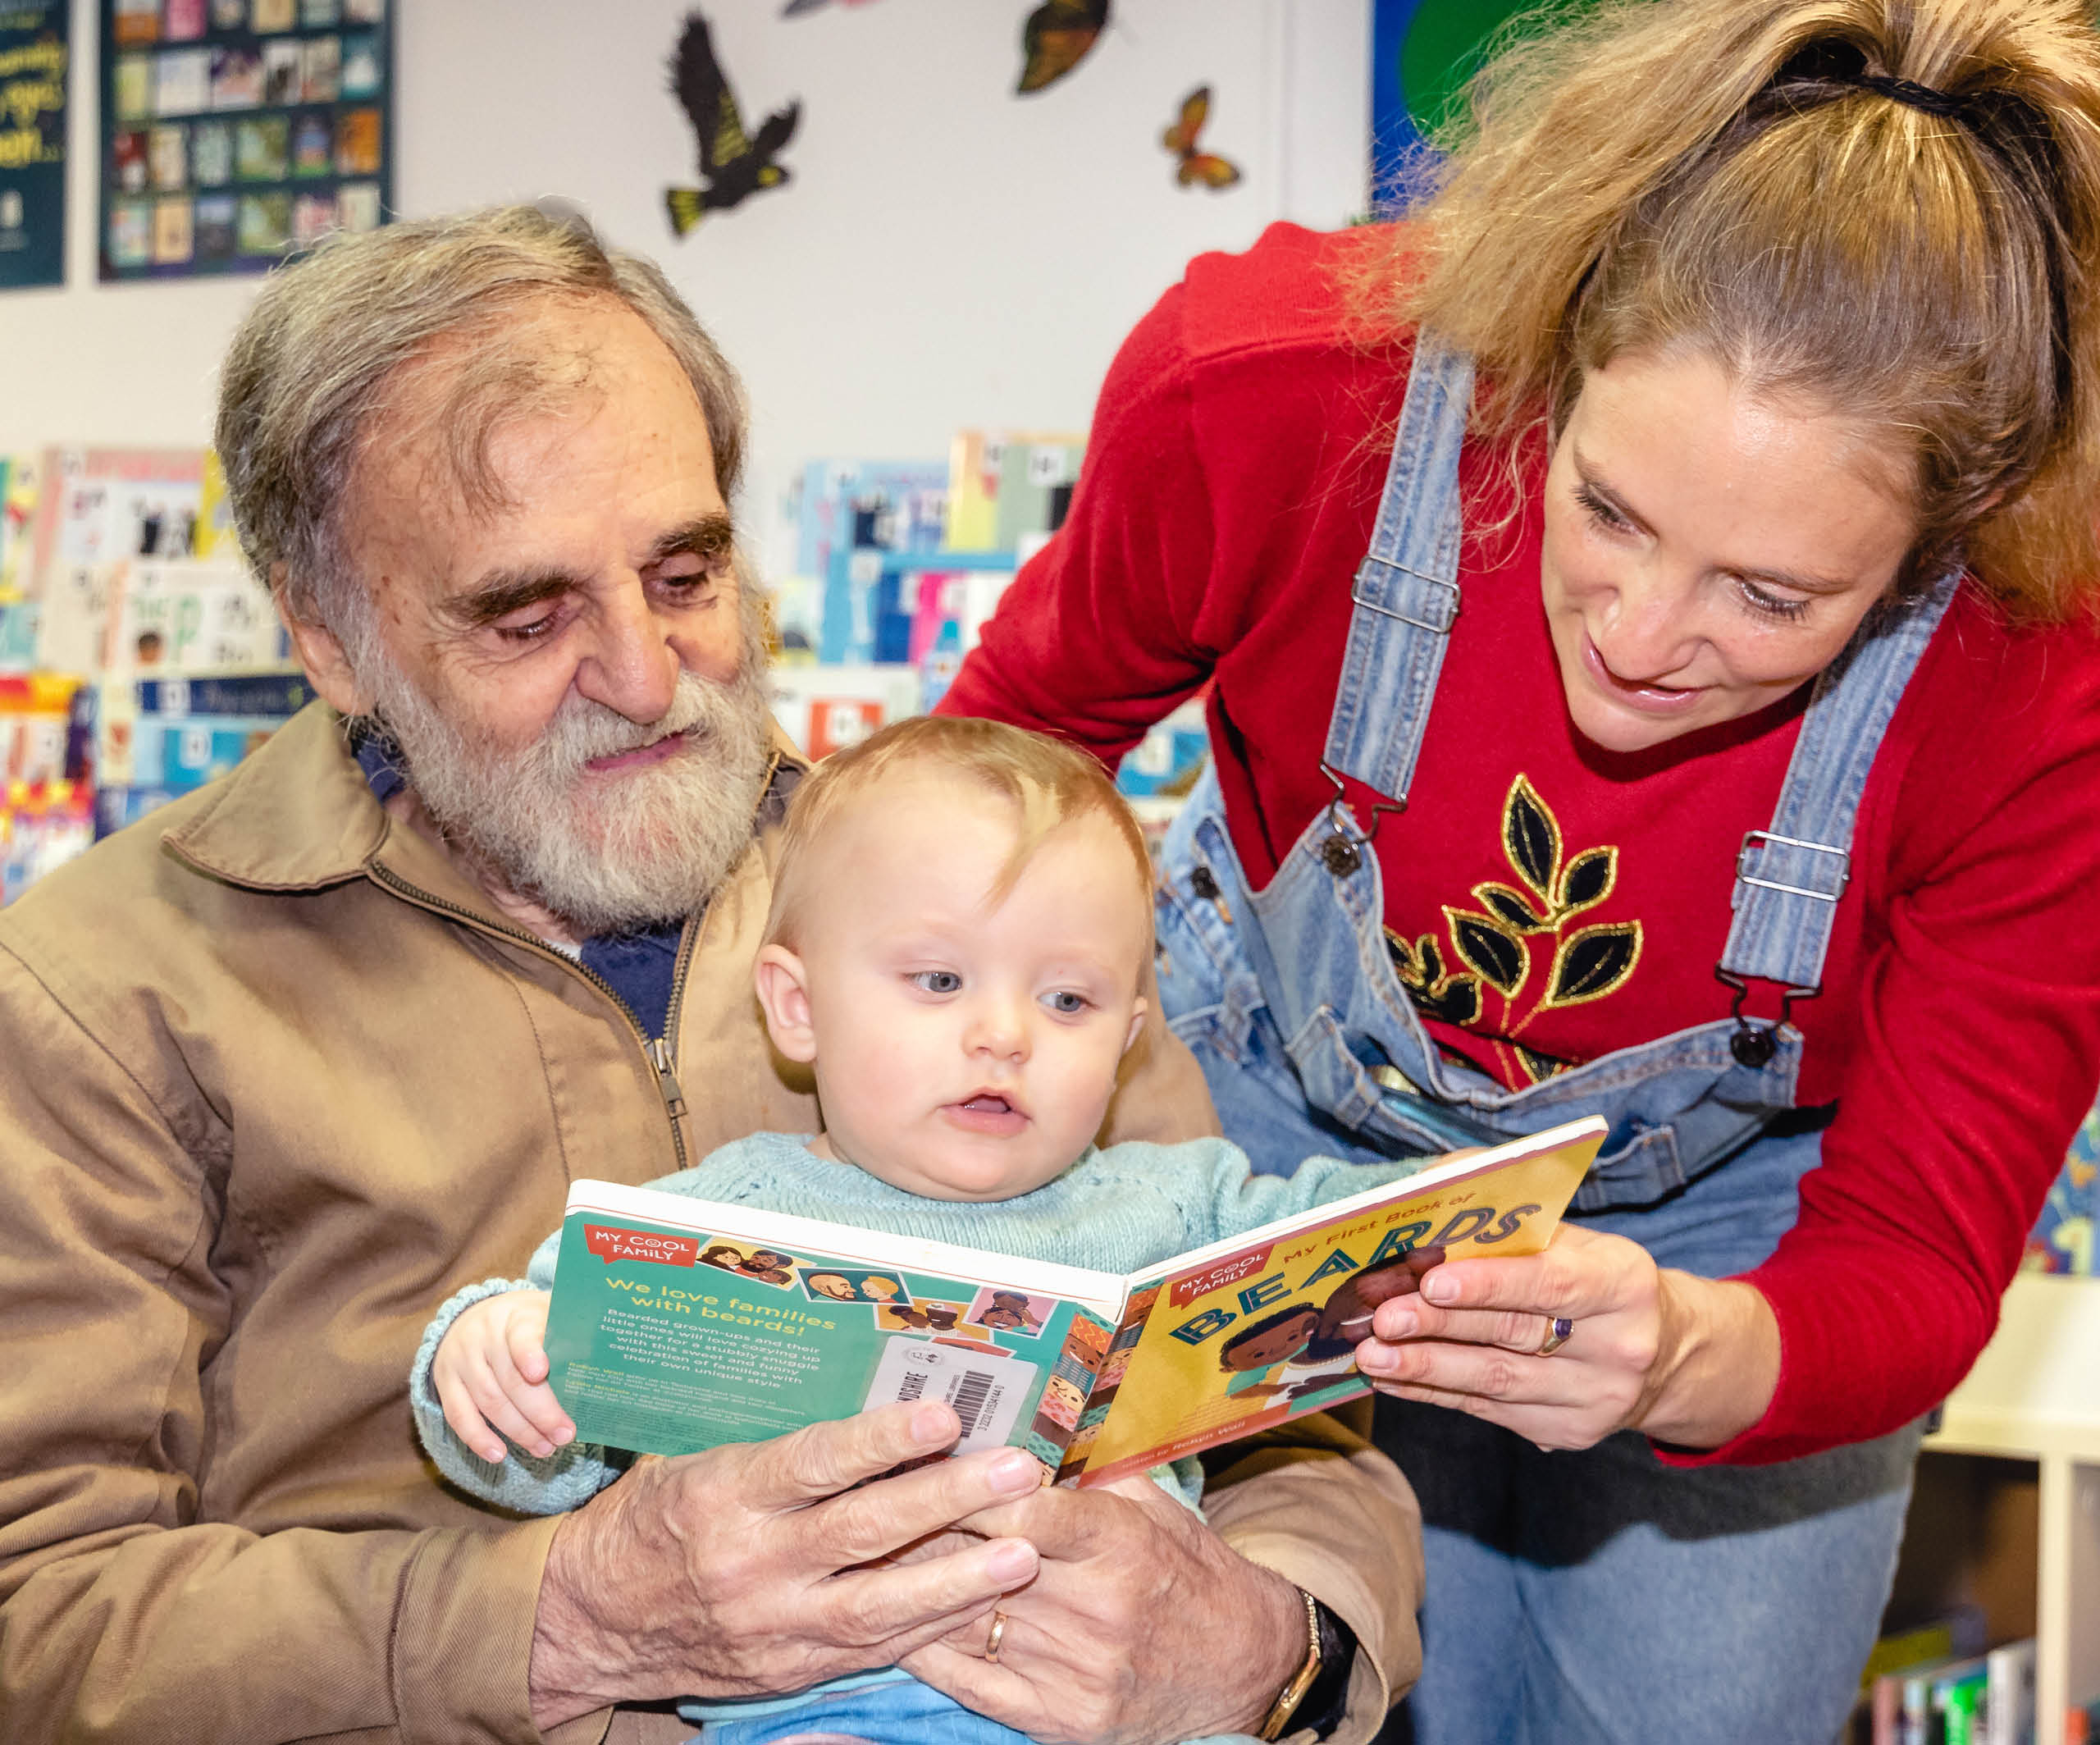 Rhymetime is held at Sutherland Library on Tuesday afternoons at 2pm during school terms. Suitable for babies aged 0 to 24 months and their parents.